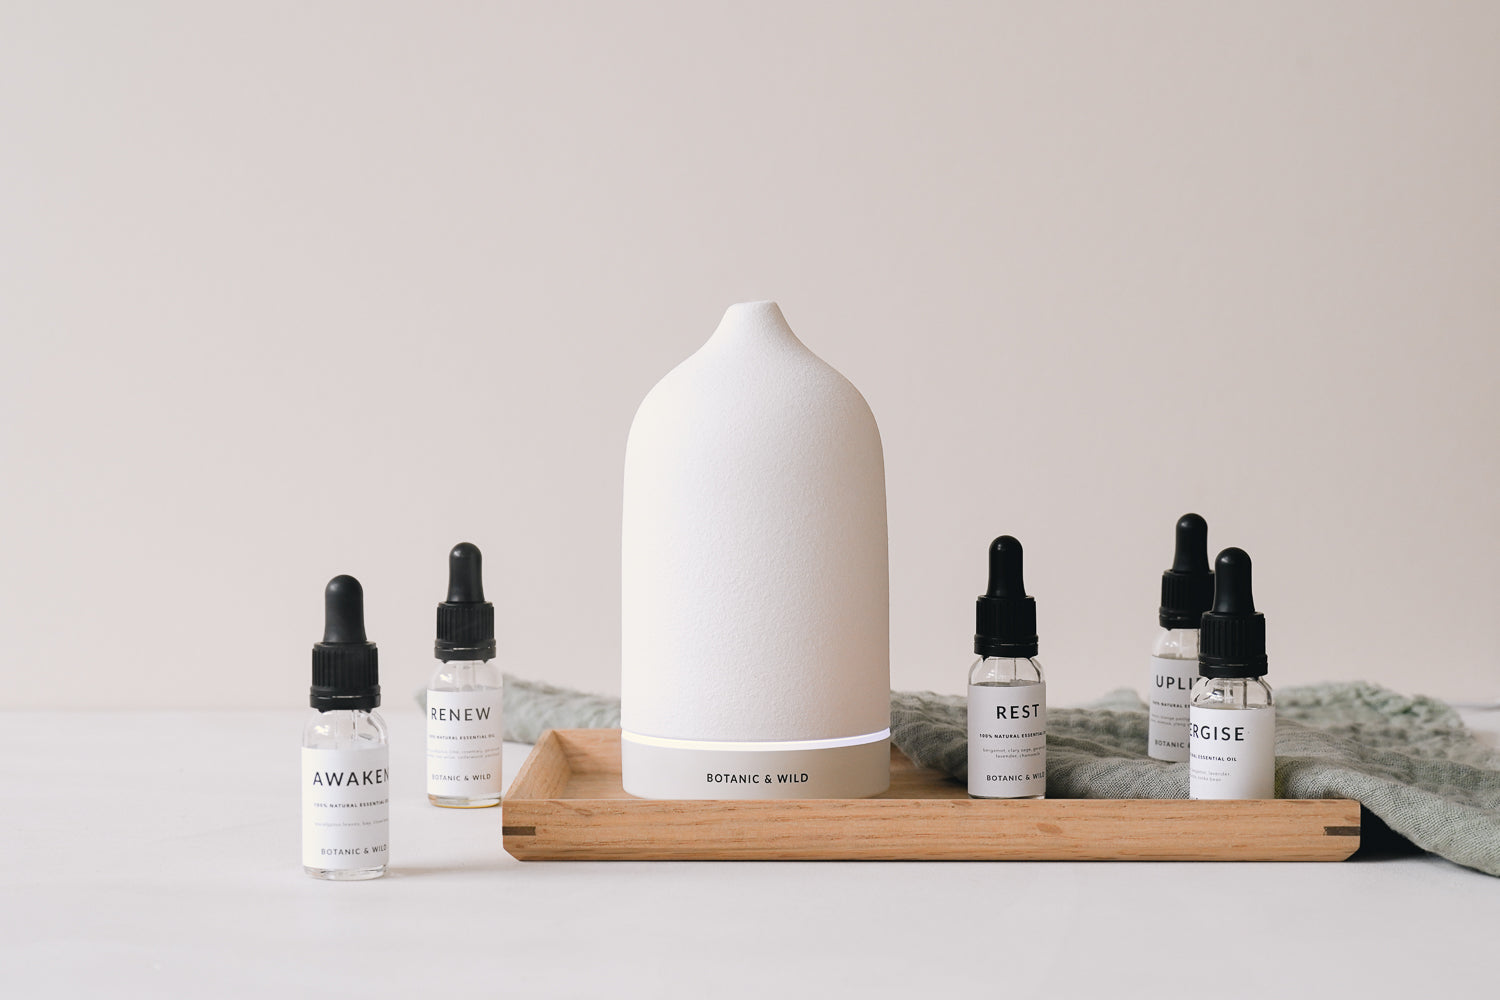 Introducing our brand-new Ceramic Aromatherapy Diffuser